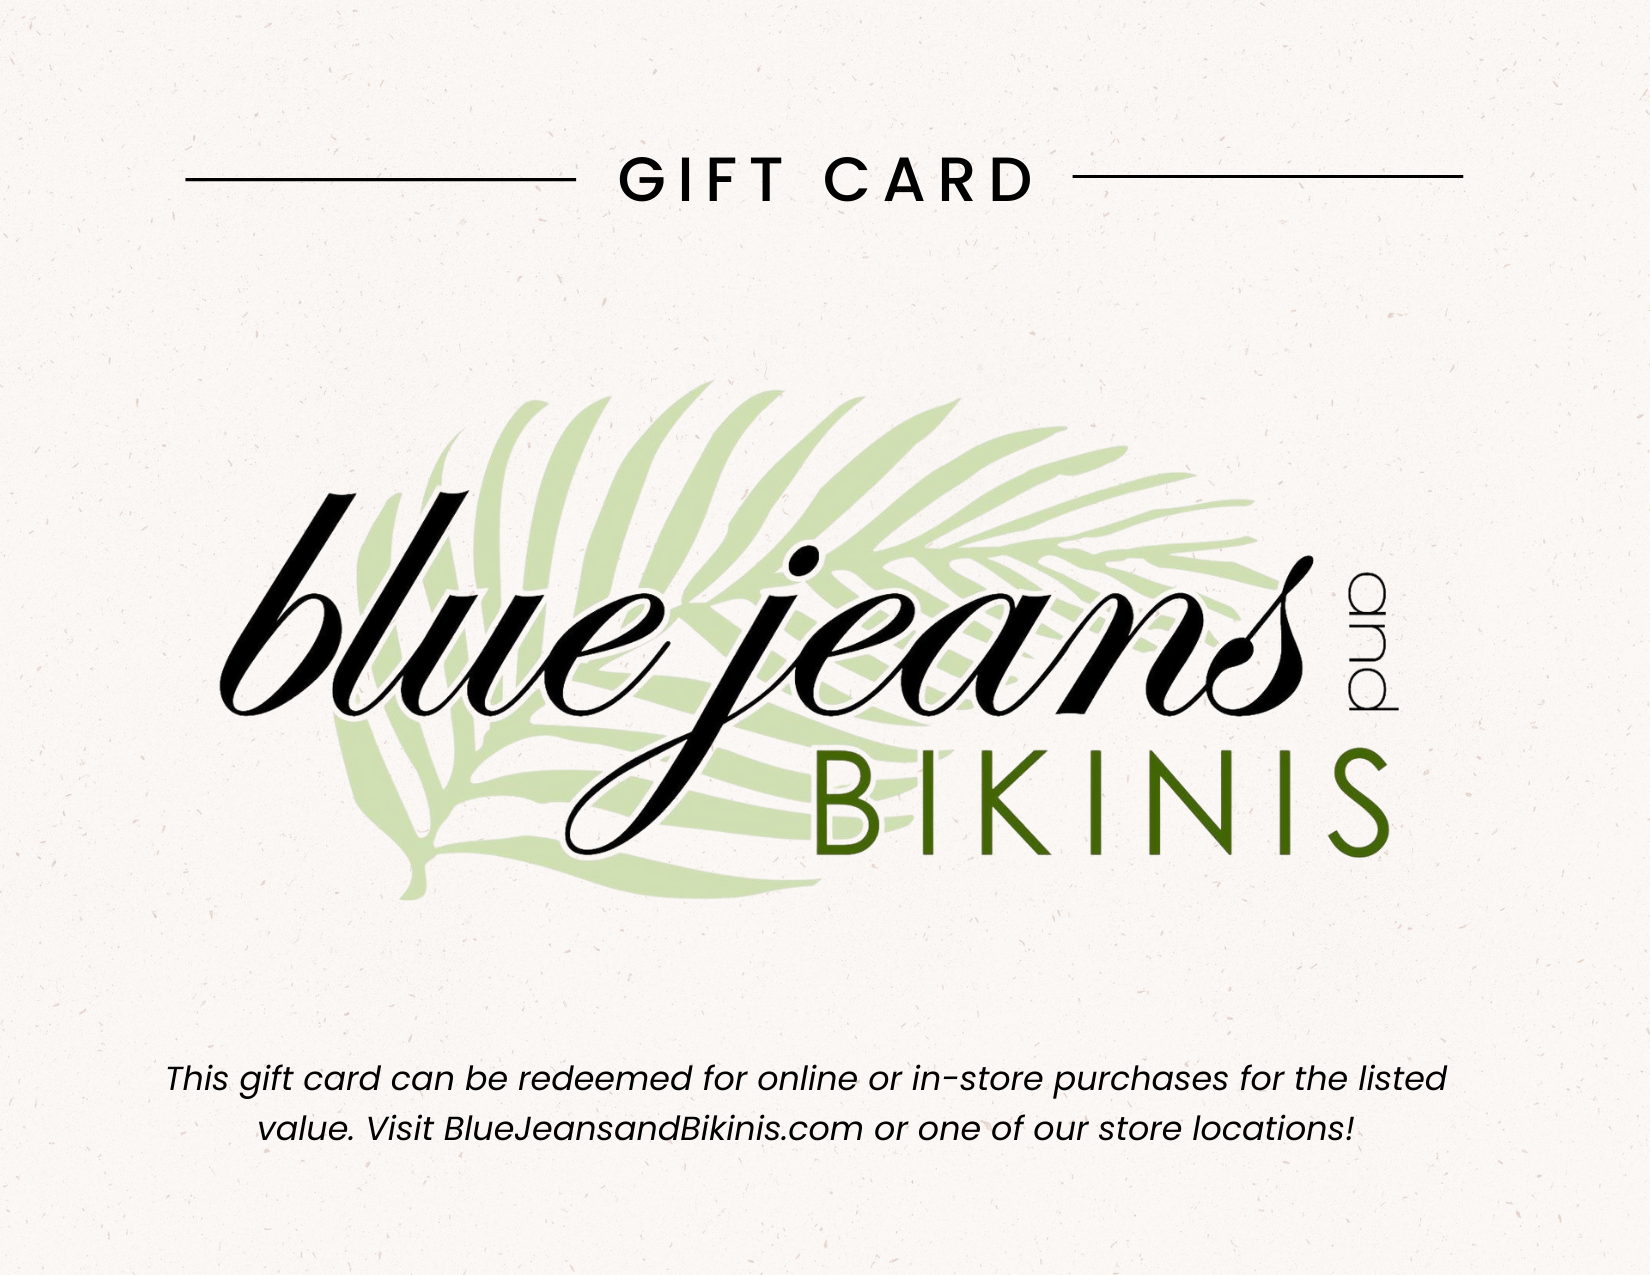 Blue Jeans and Bikinis Gift Card